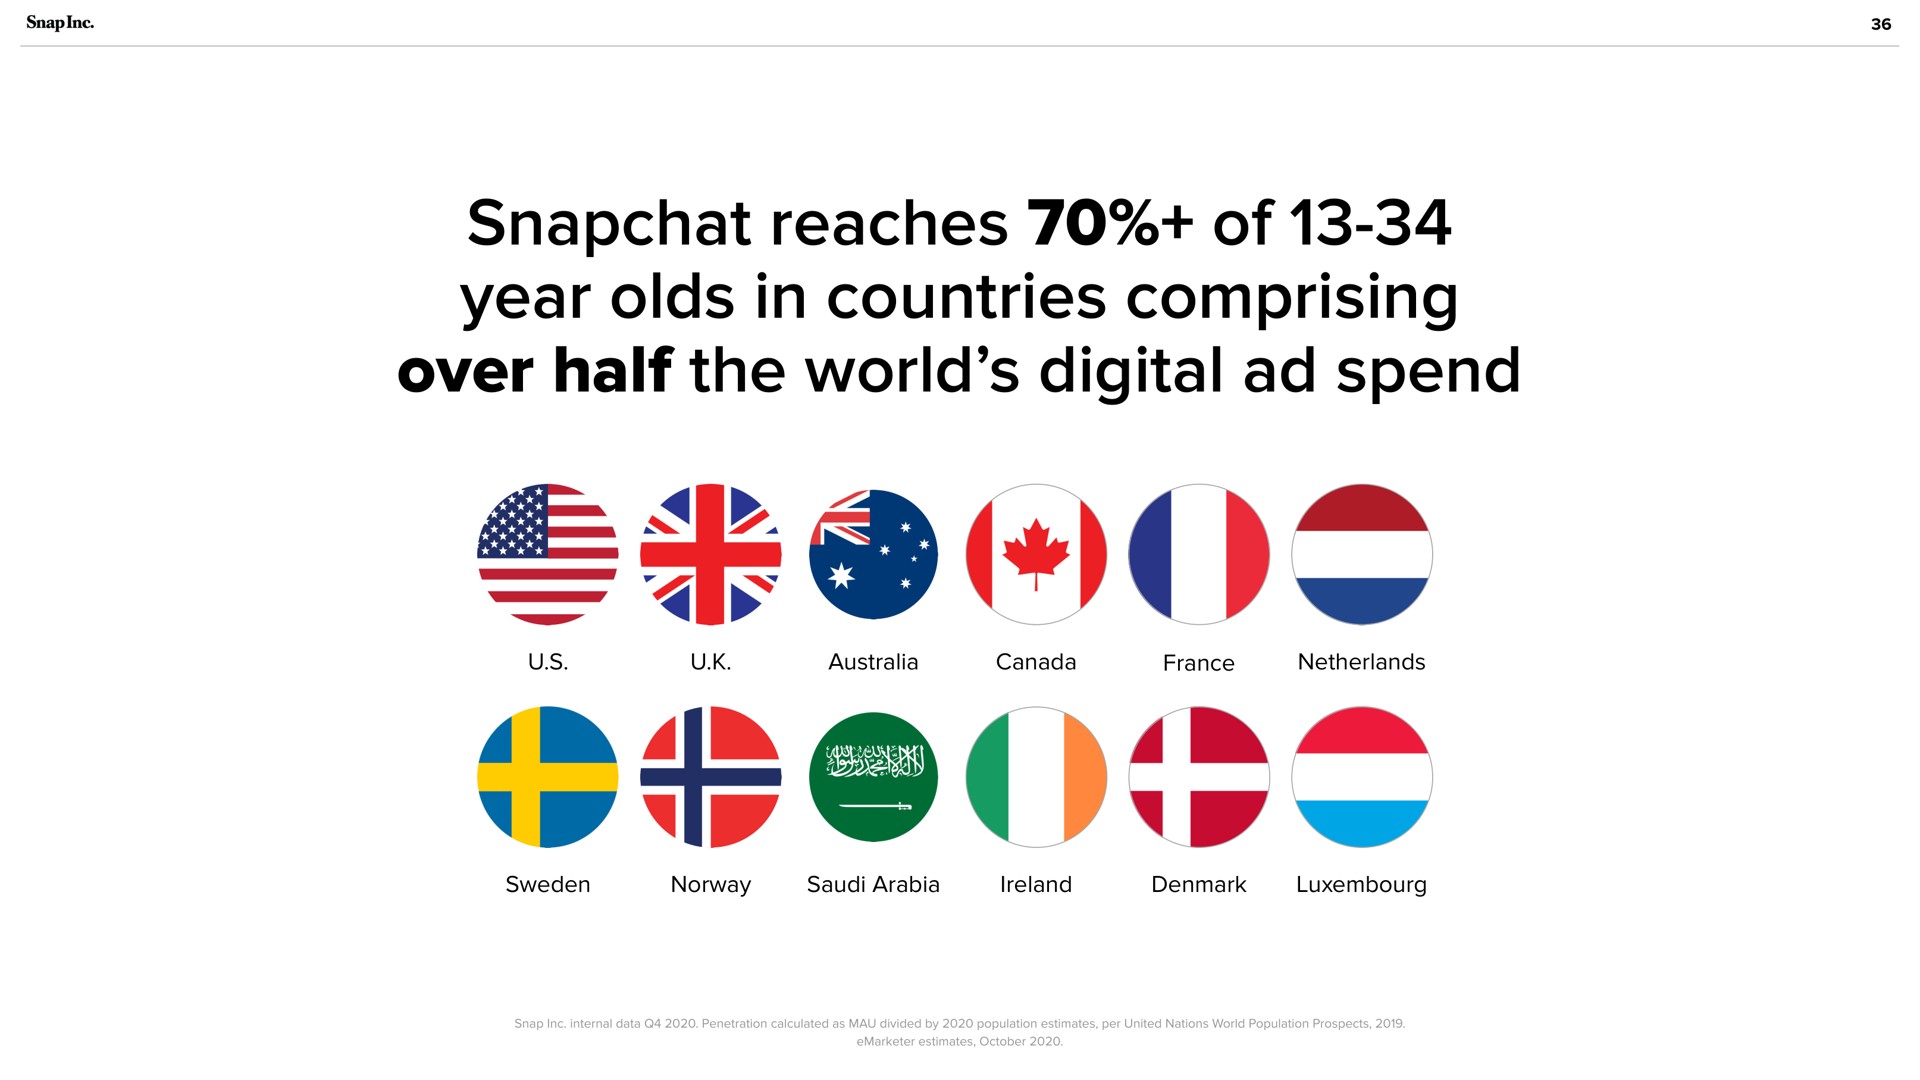 reaches of year olds in countries comprising over half the world digital spend | Snap Inc